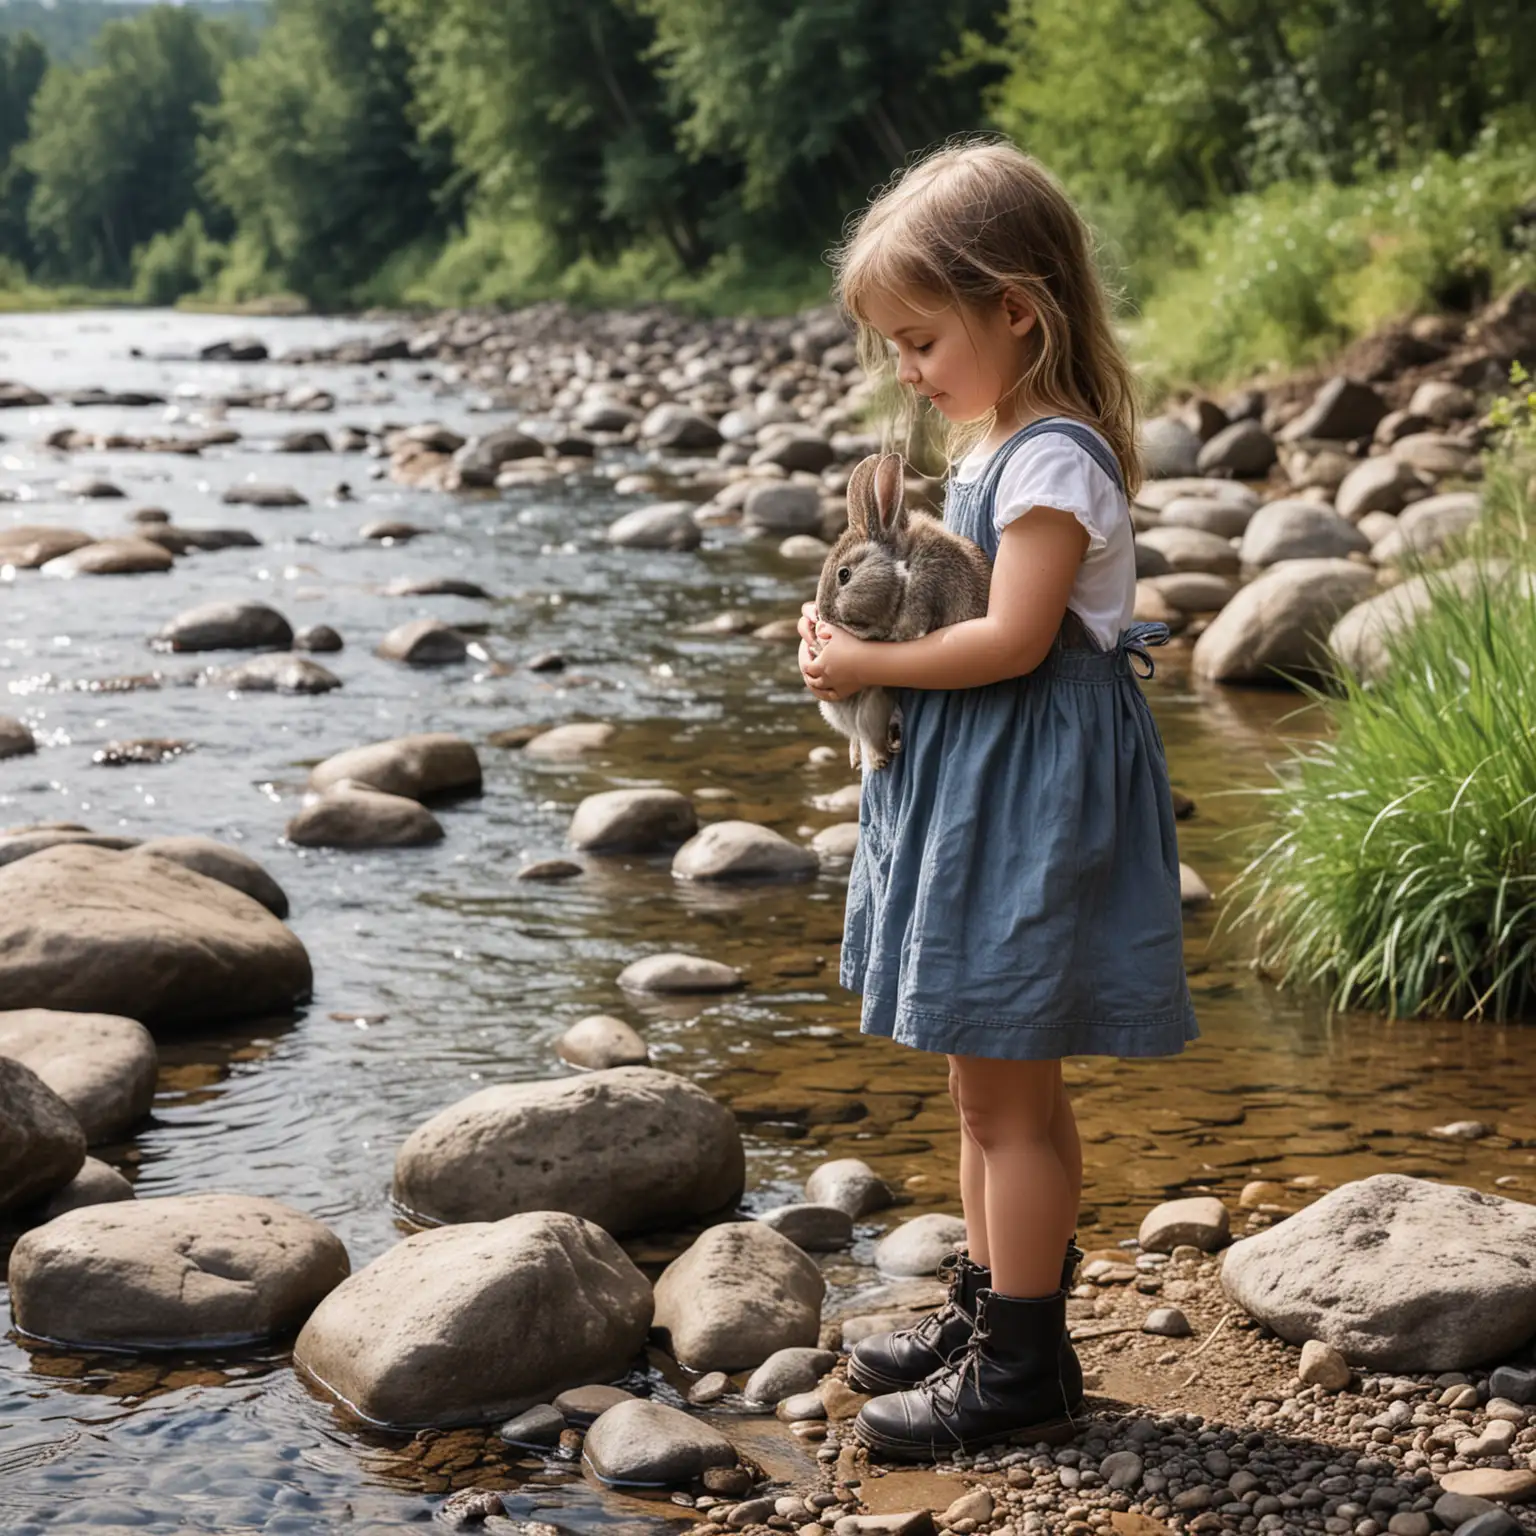 Little girl holding a rabbit, beside a shallow river, with big rocks